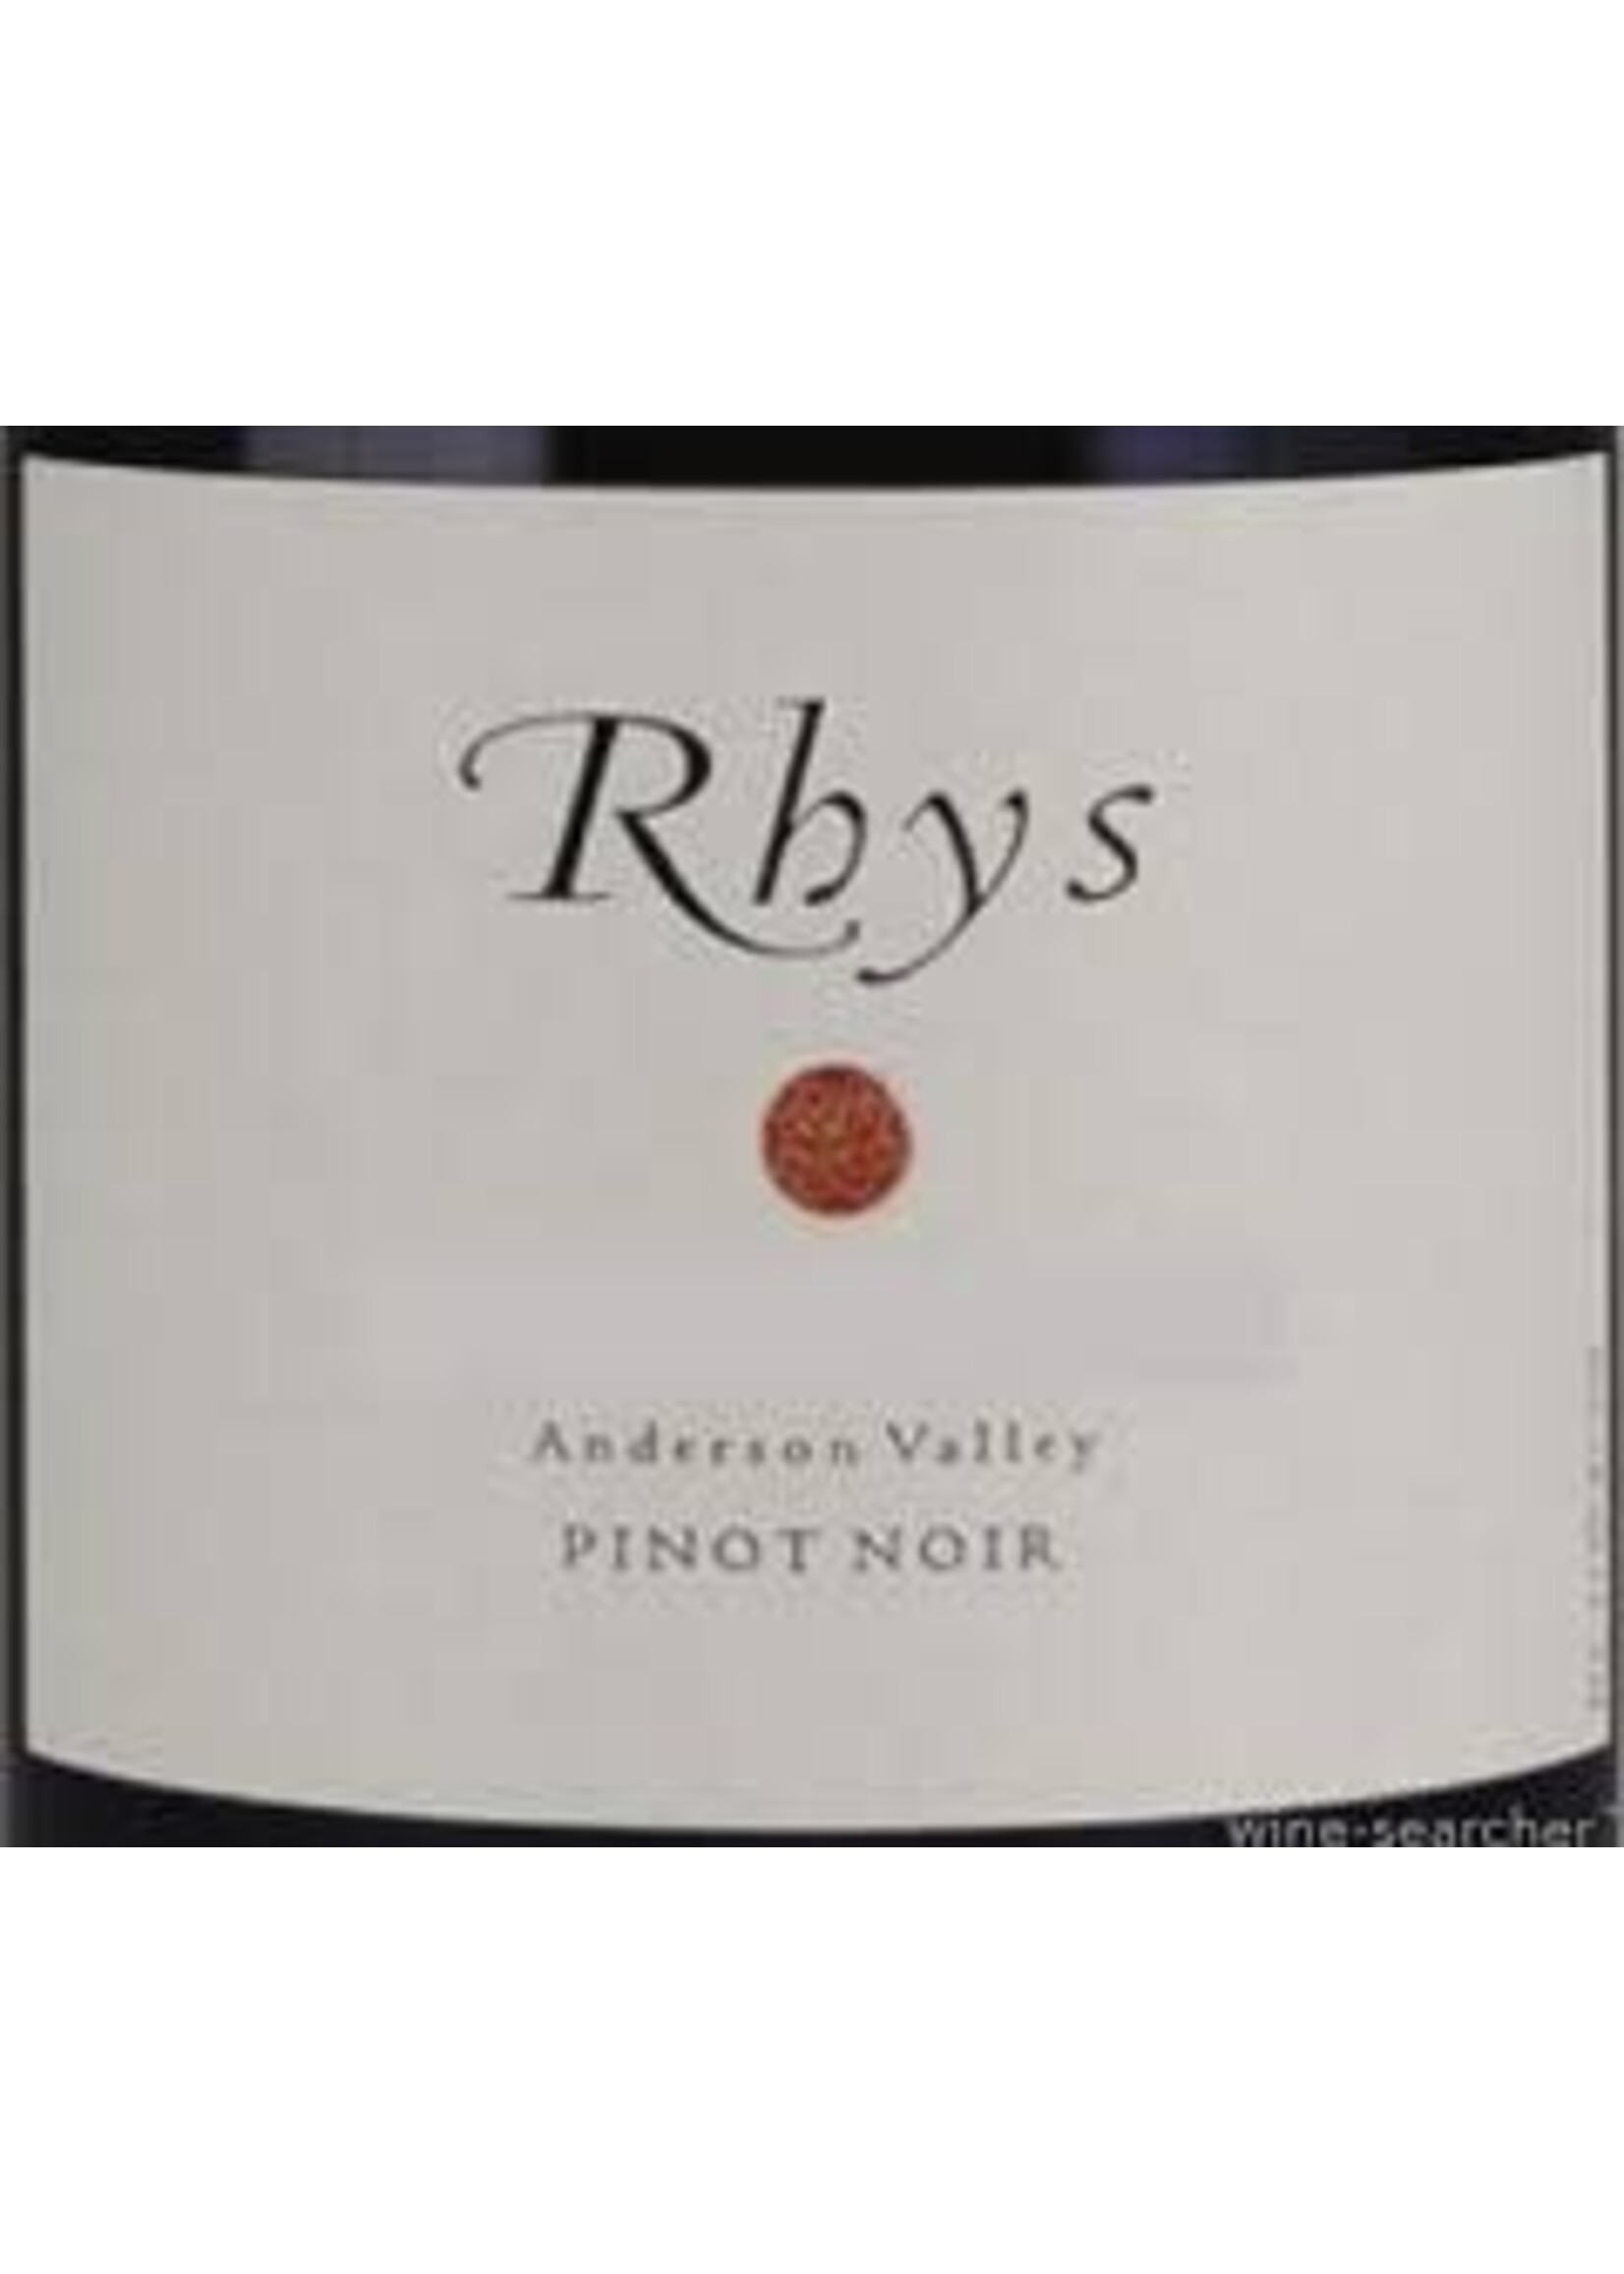 Rhys 2017 Pinot Noir Anderson Valley 750ml